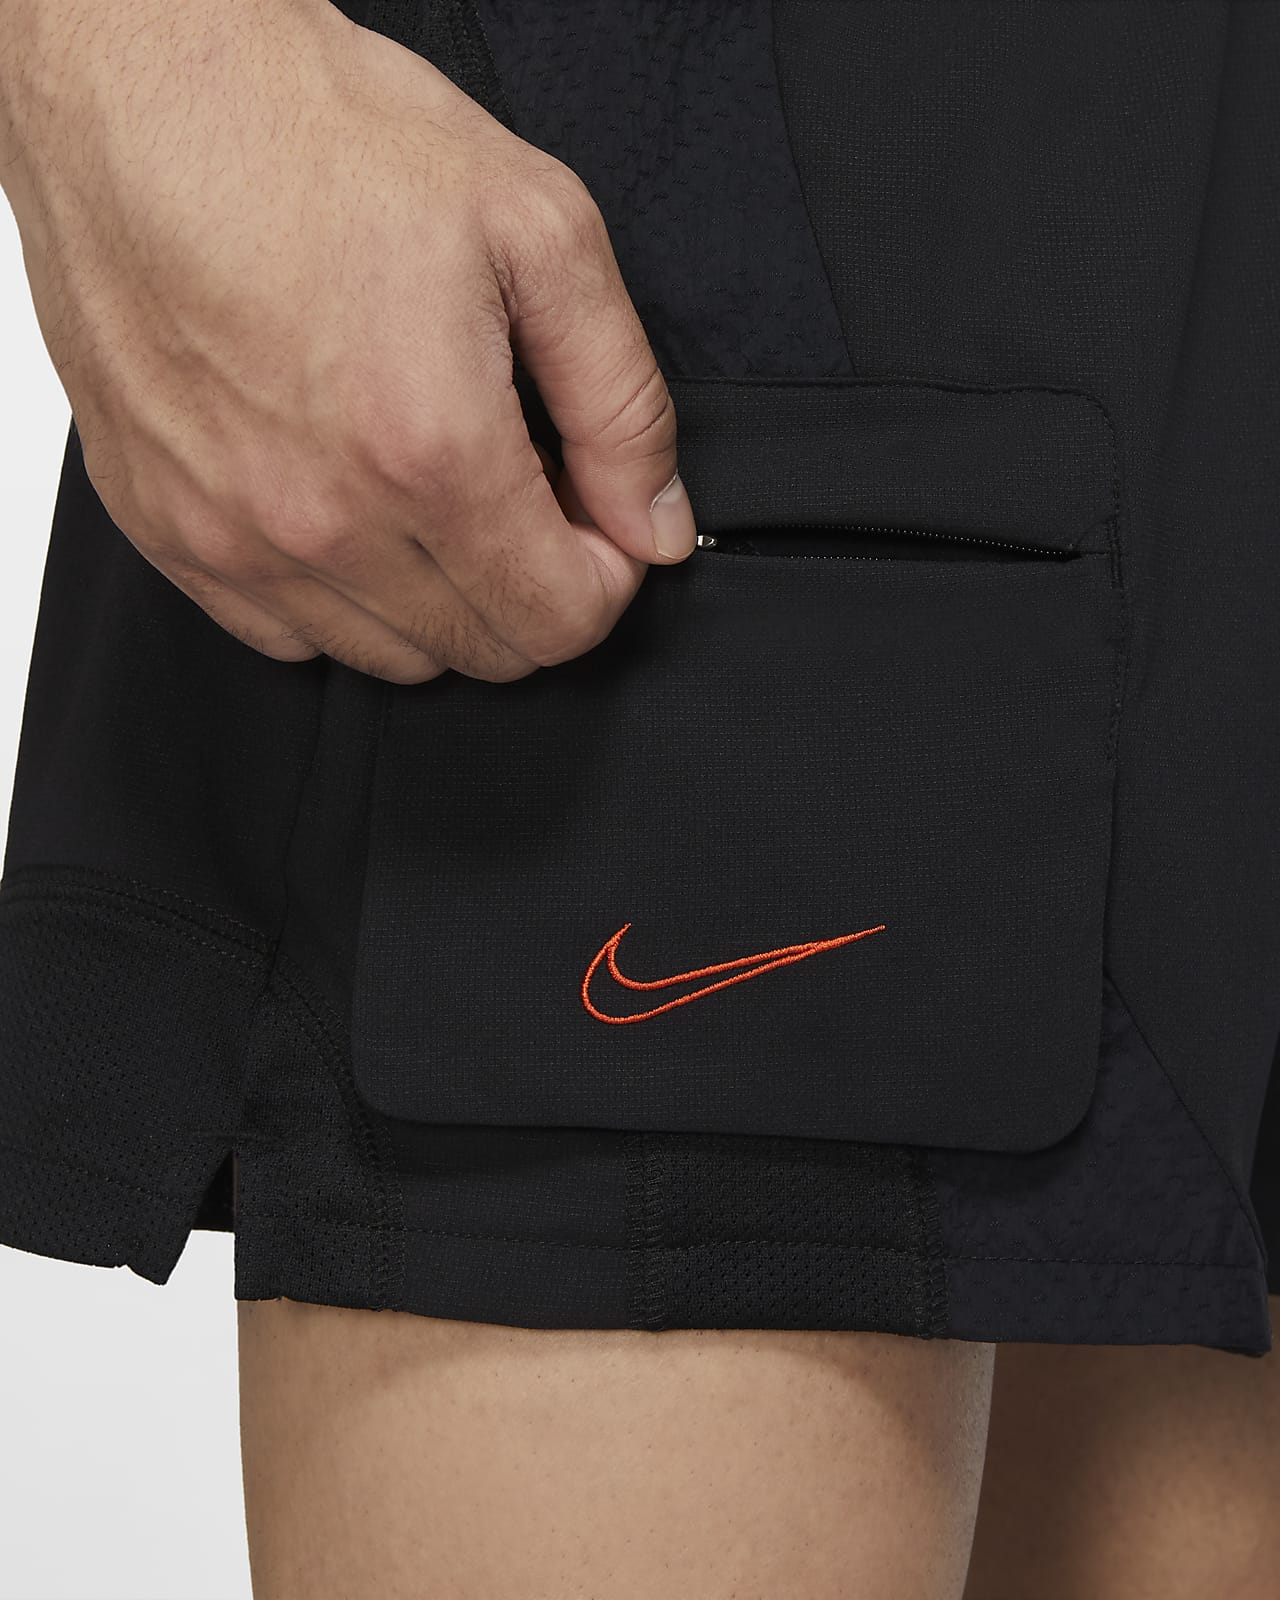 nike rugby shorts